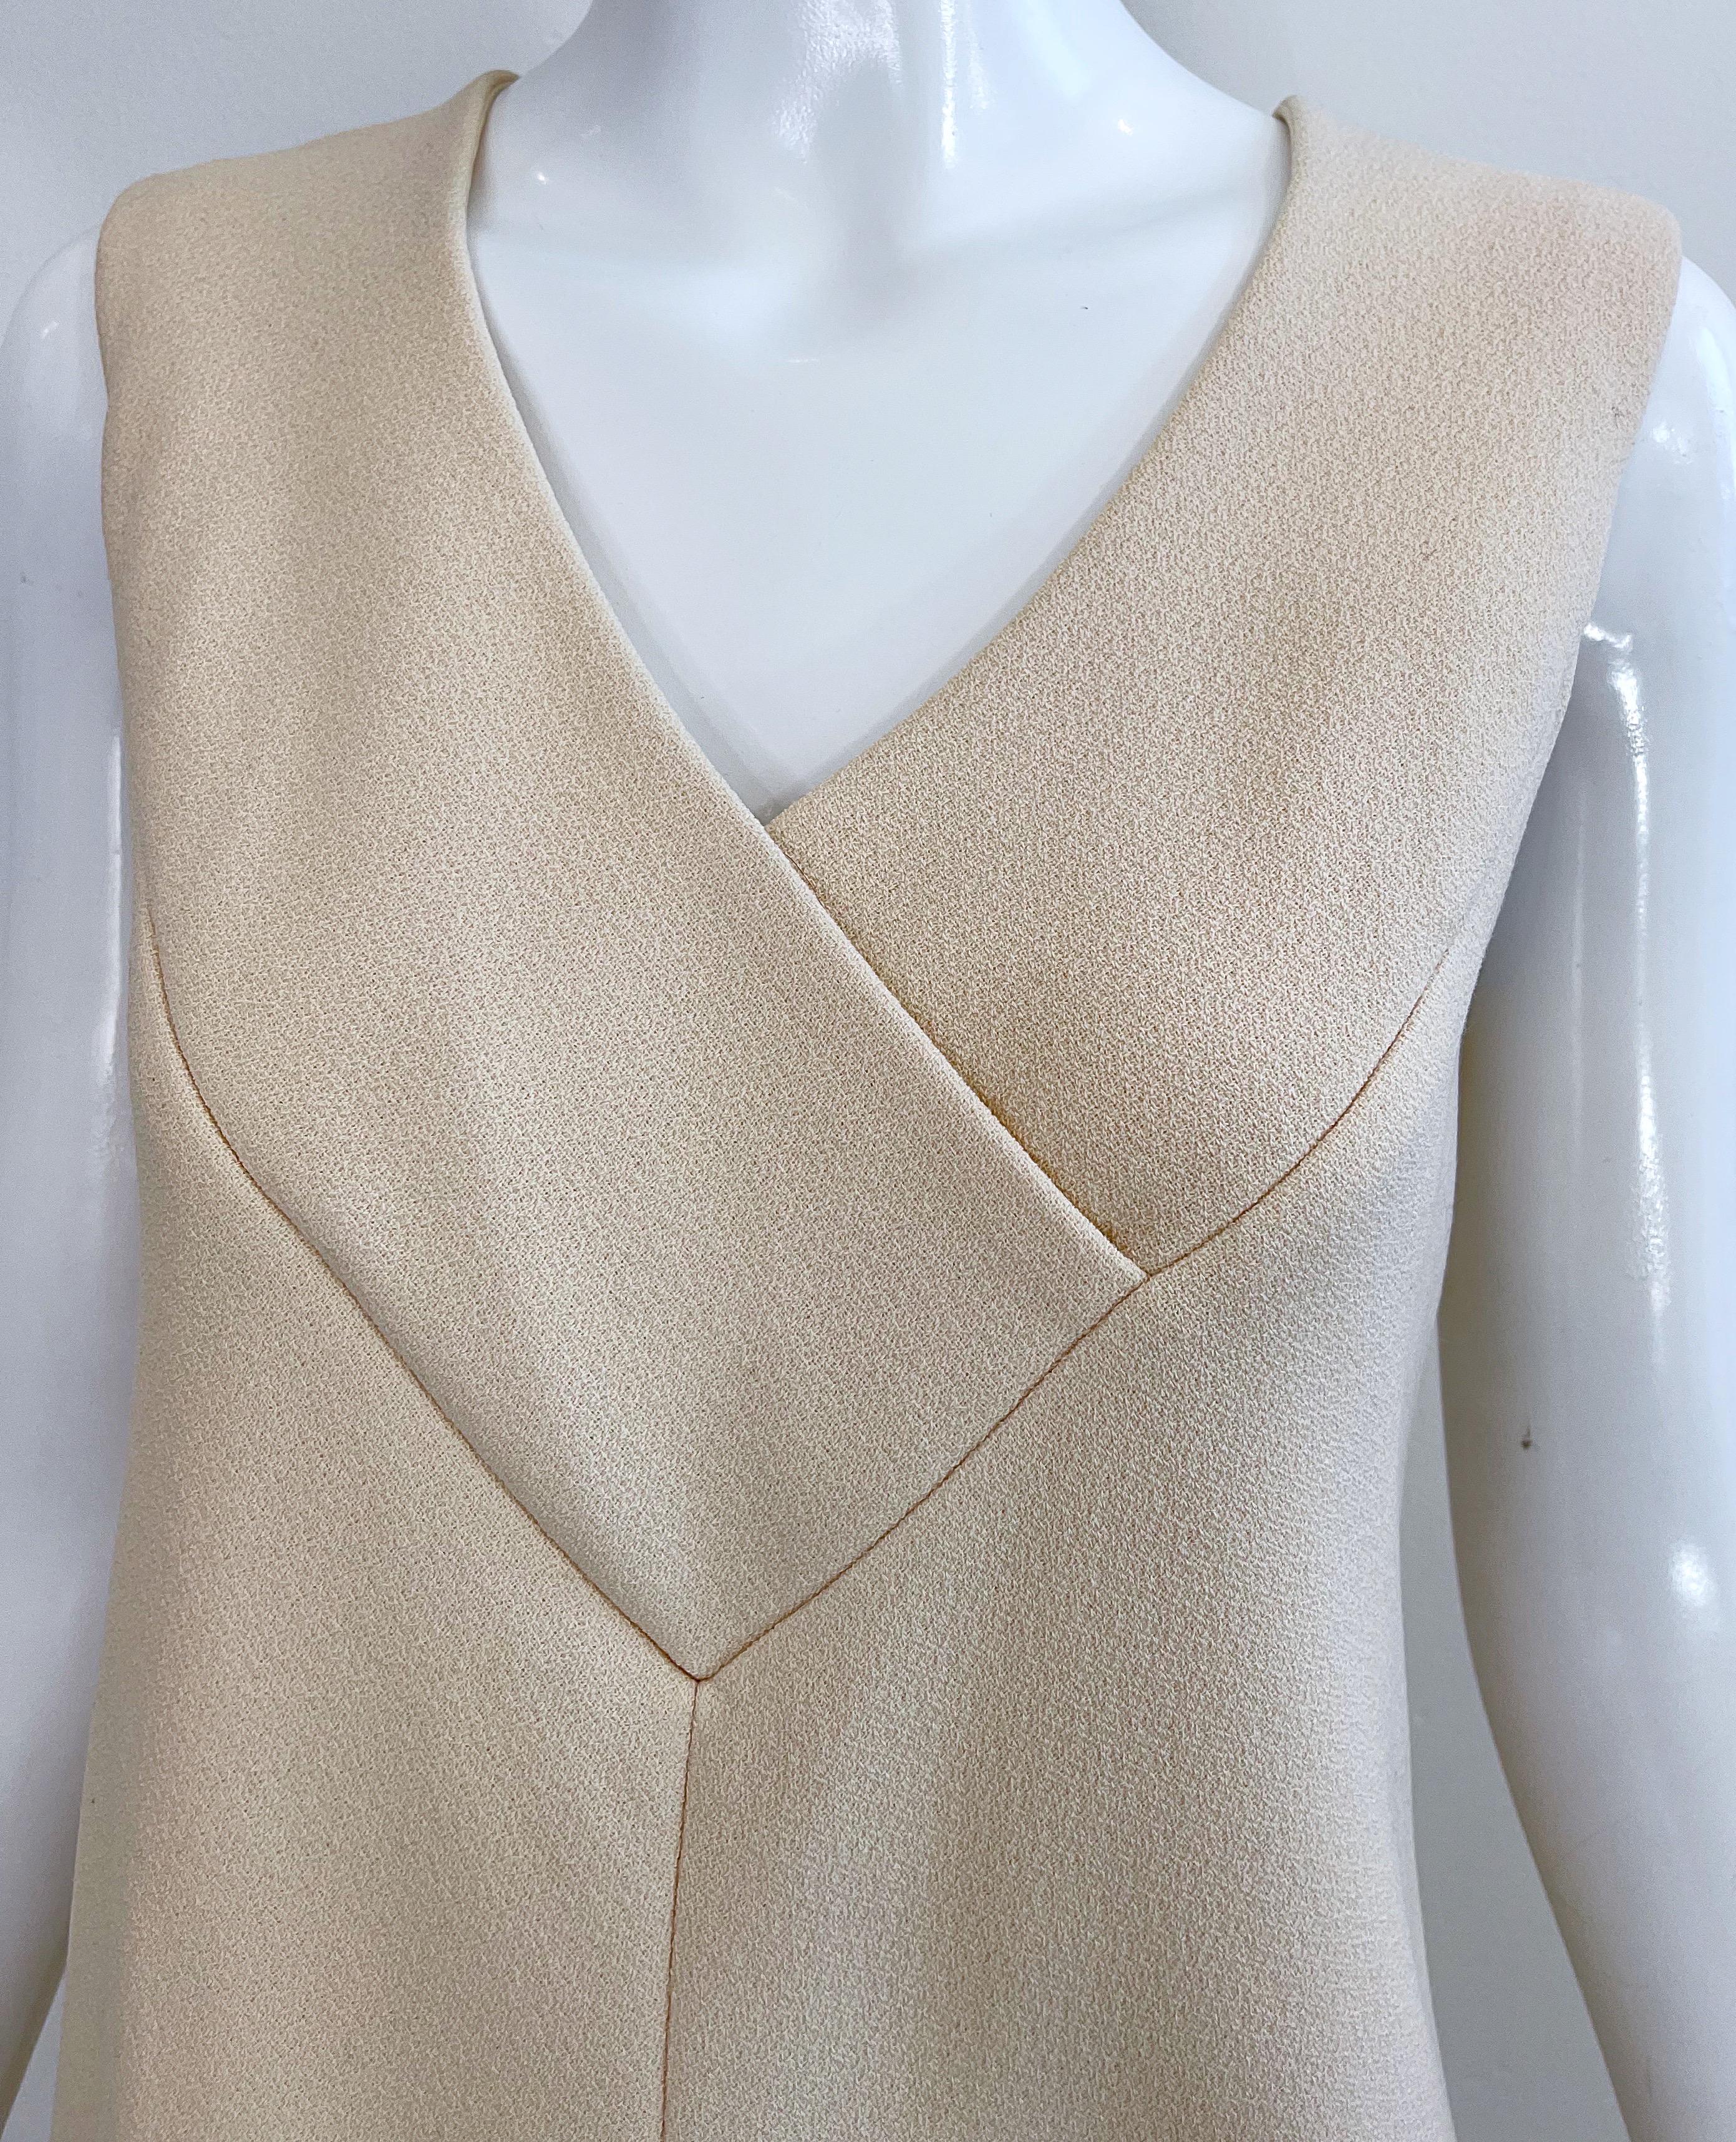 Pauline Trigere 1960s Ivory Off White Sleeveless Vintage Wool A - Line 60s Dress In Excellent Condition For Sale In San Diego, CA